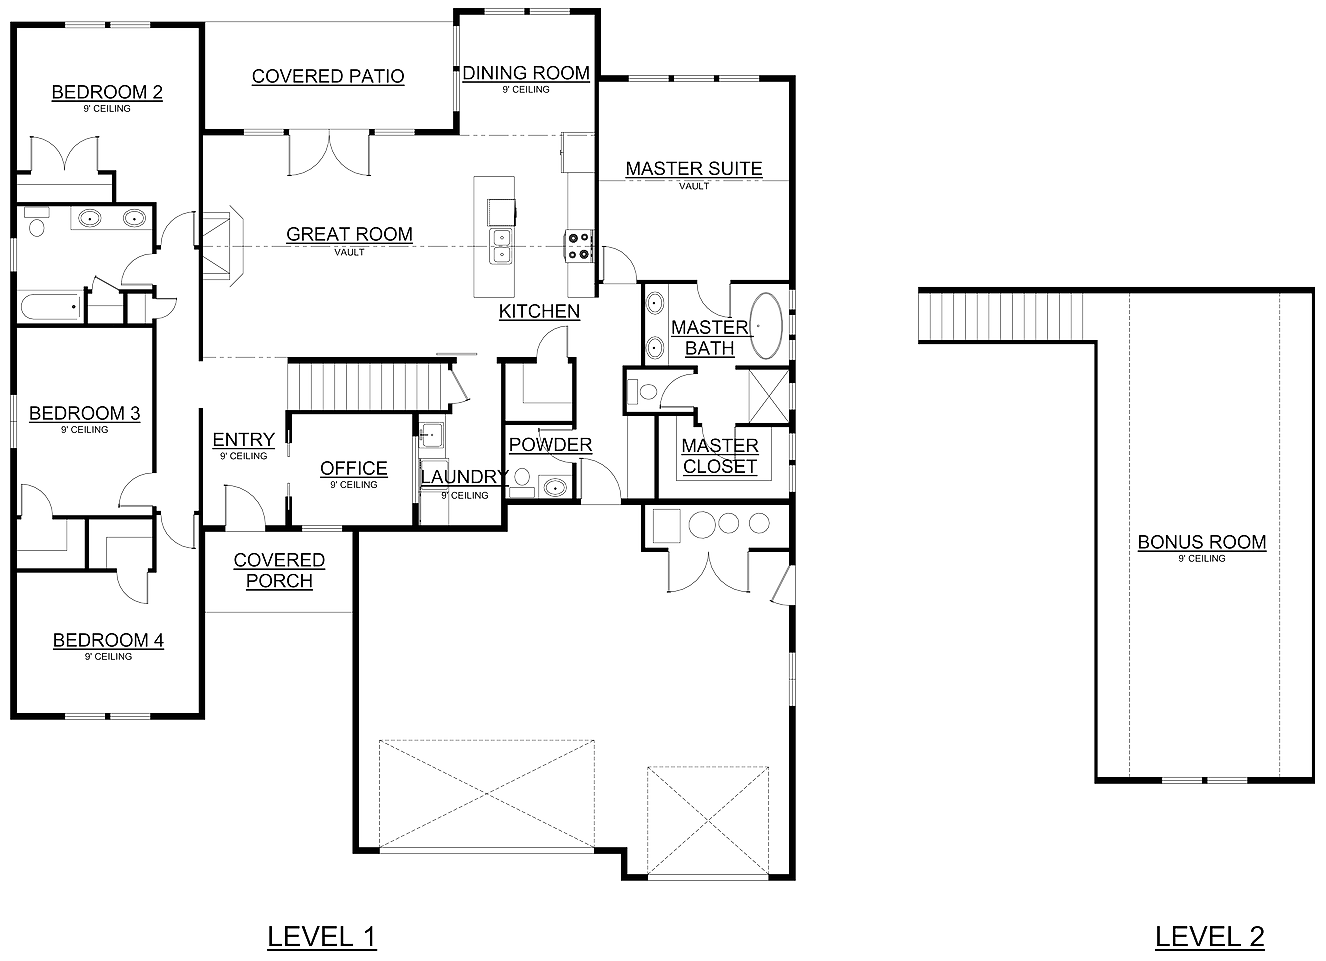 A detailed floor plan of the clarke.